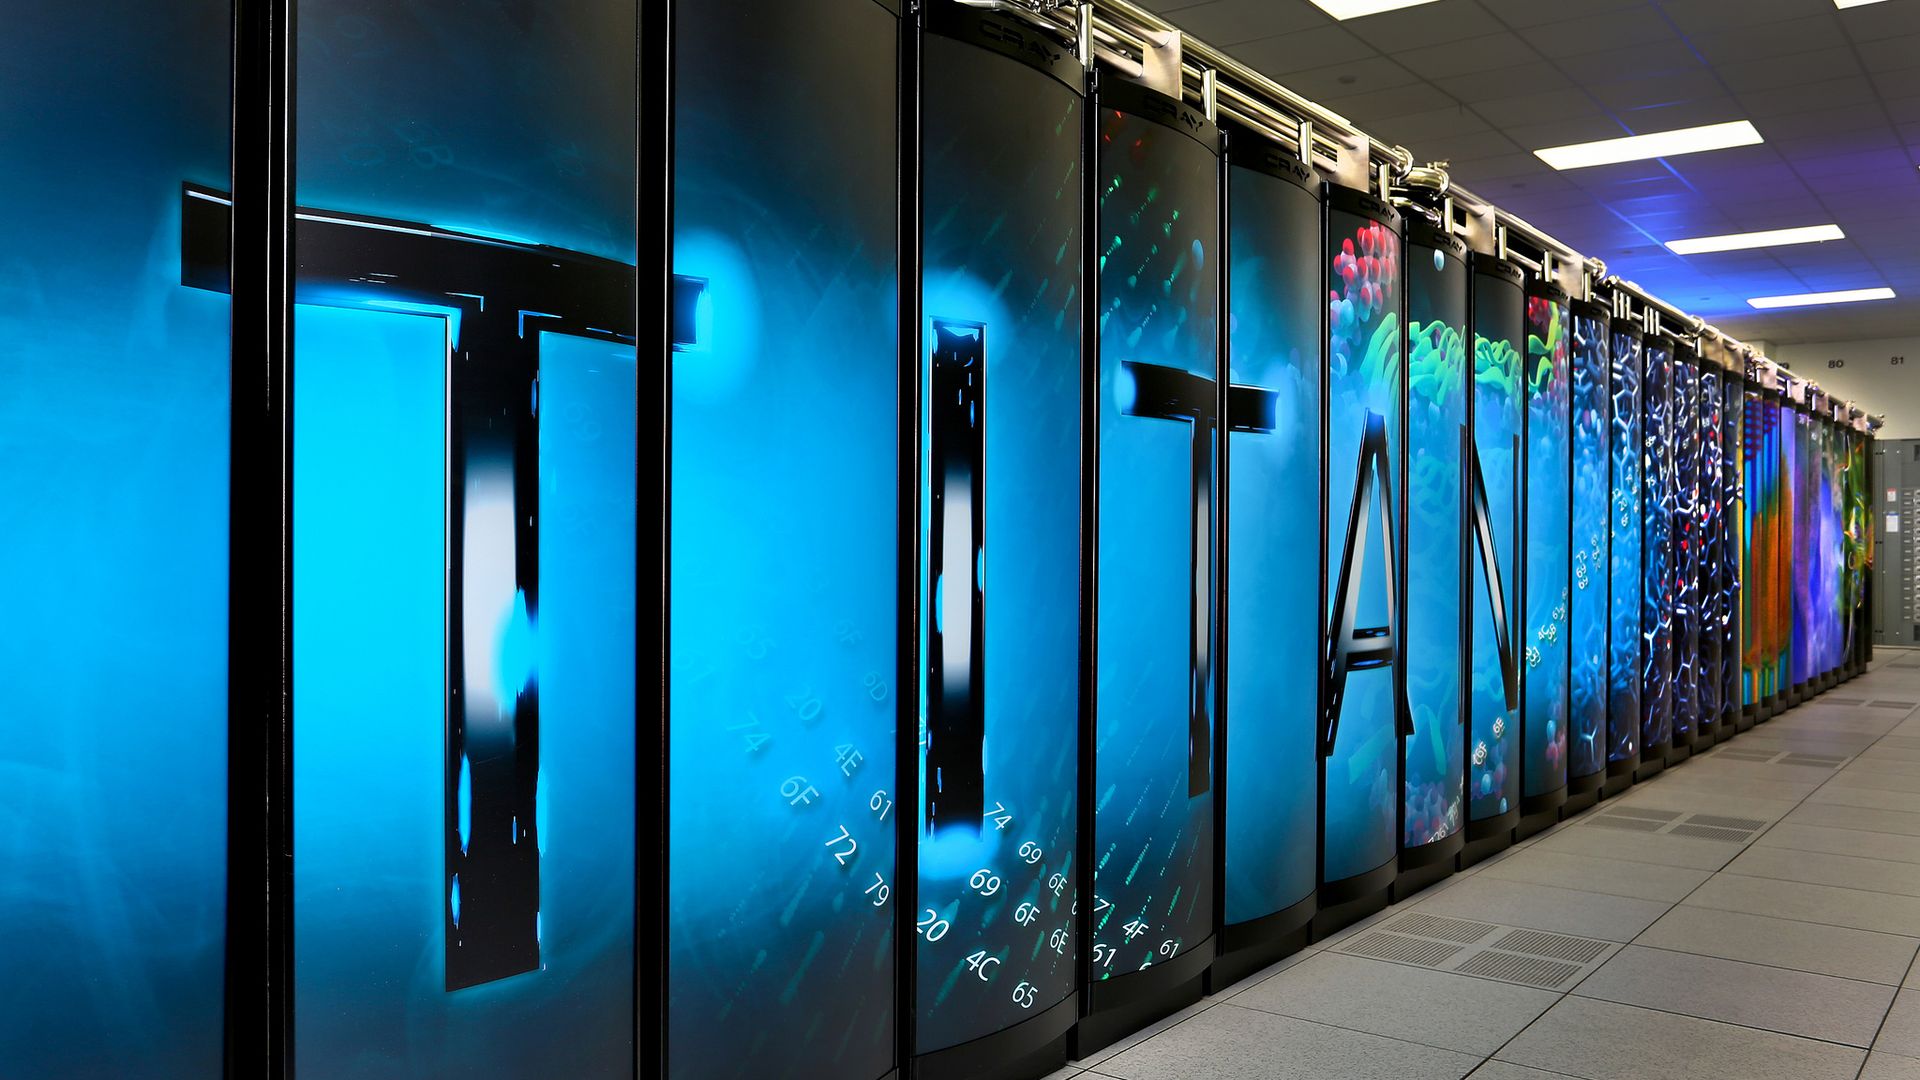 The Titan Supercomputer is one of the fastest systems in the world.